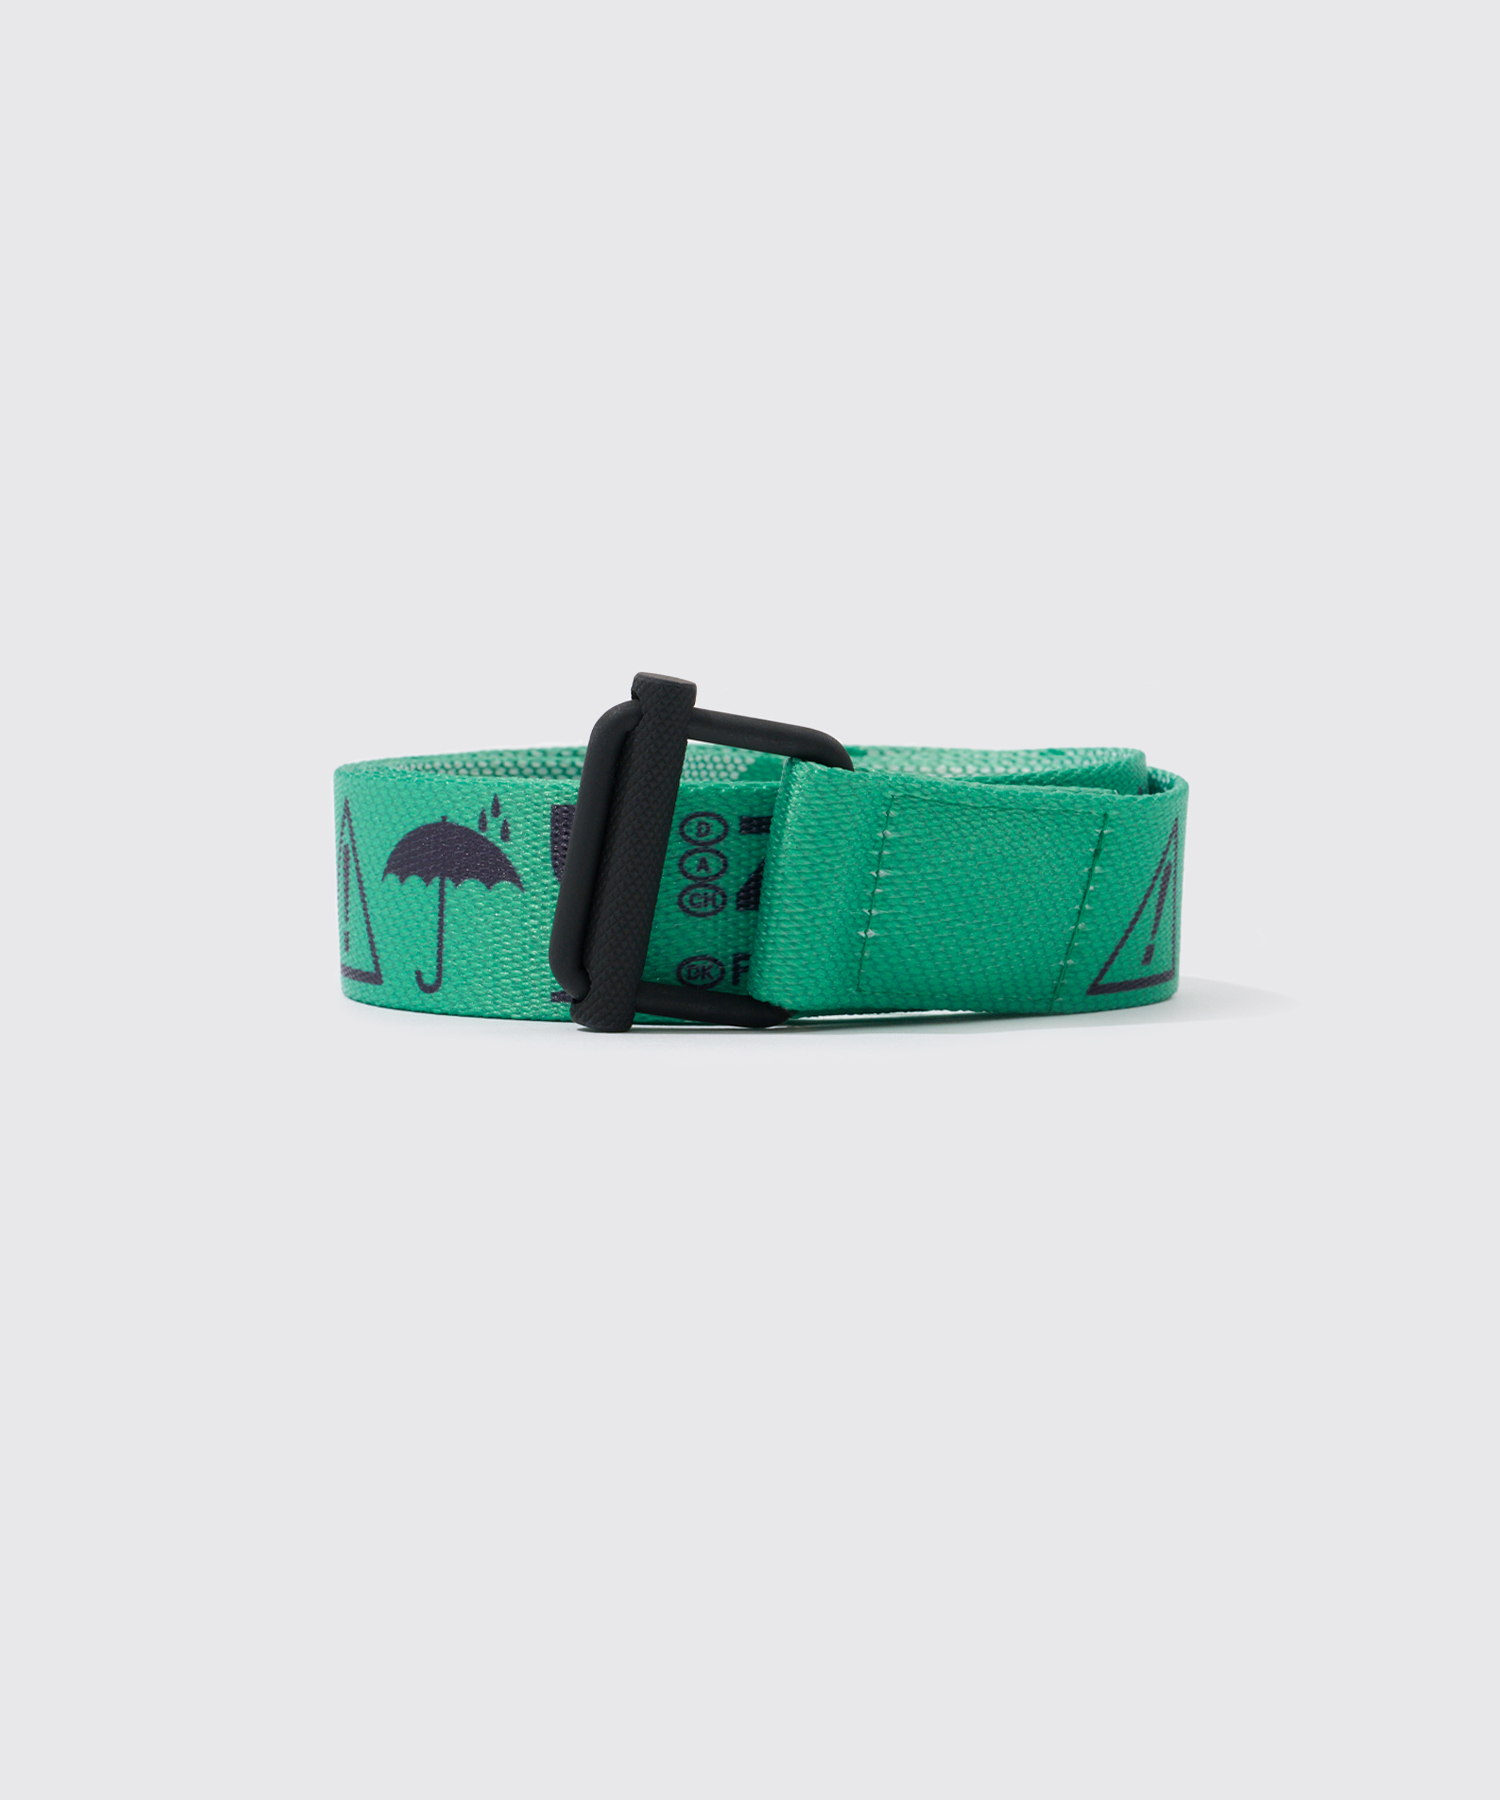 See To Belt (Green)